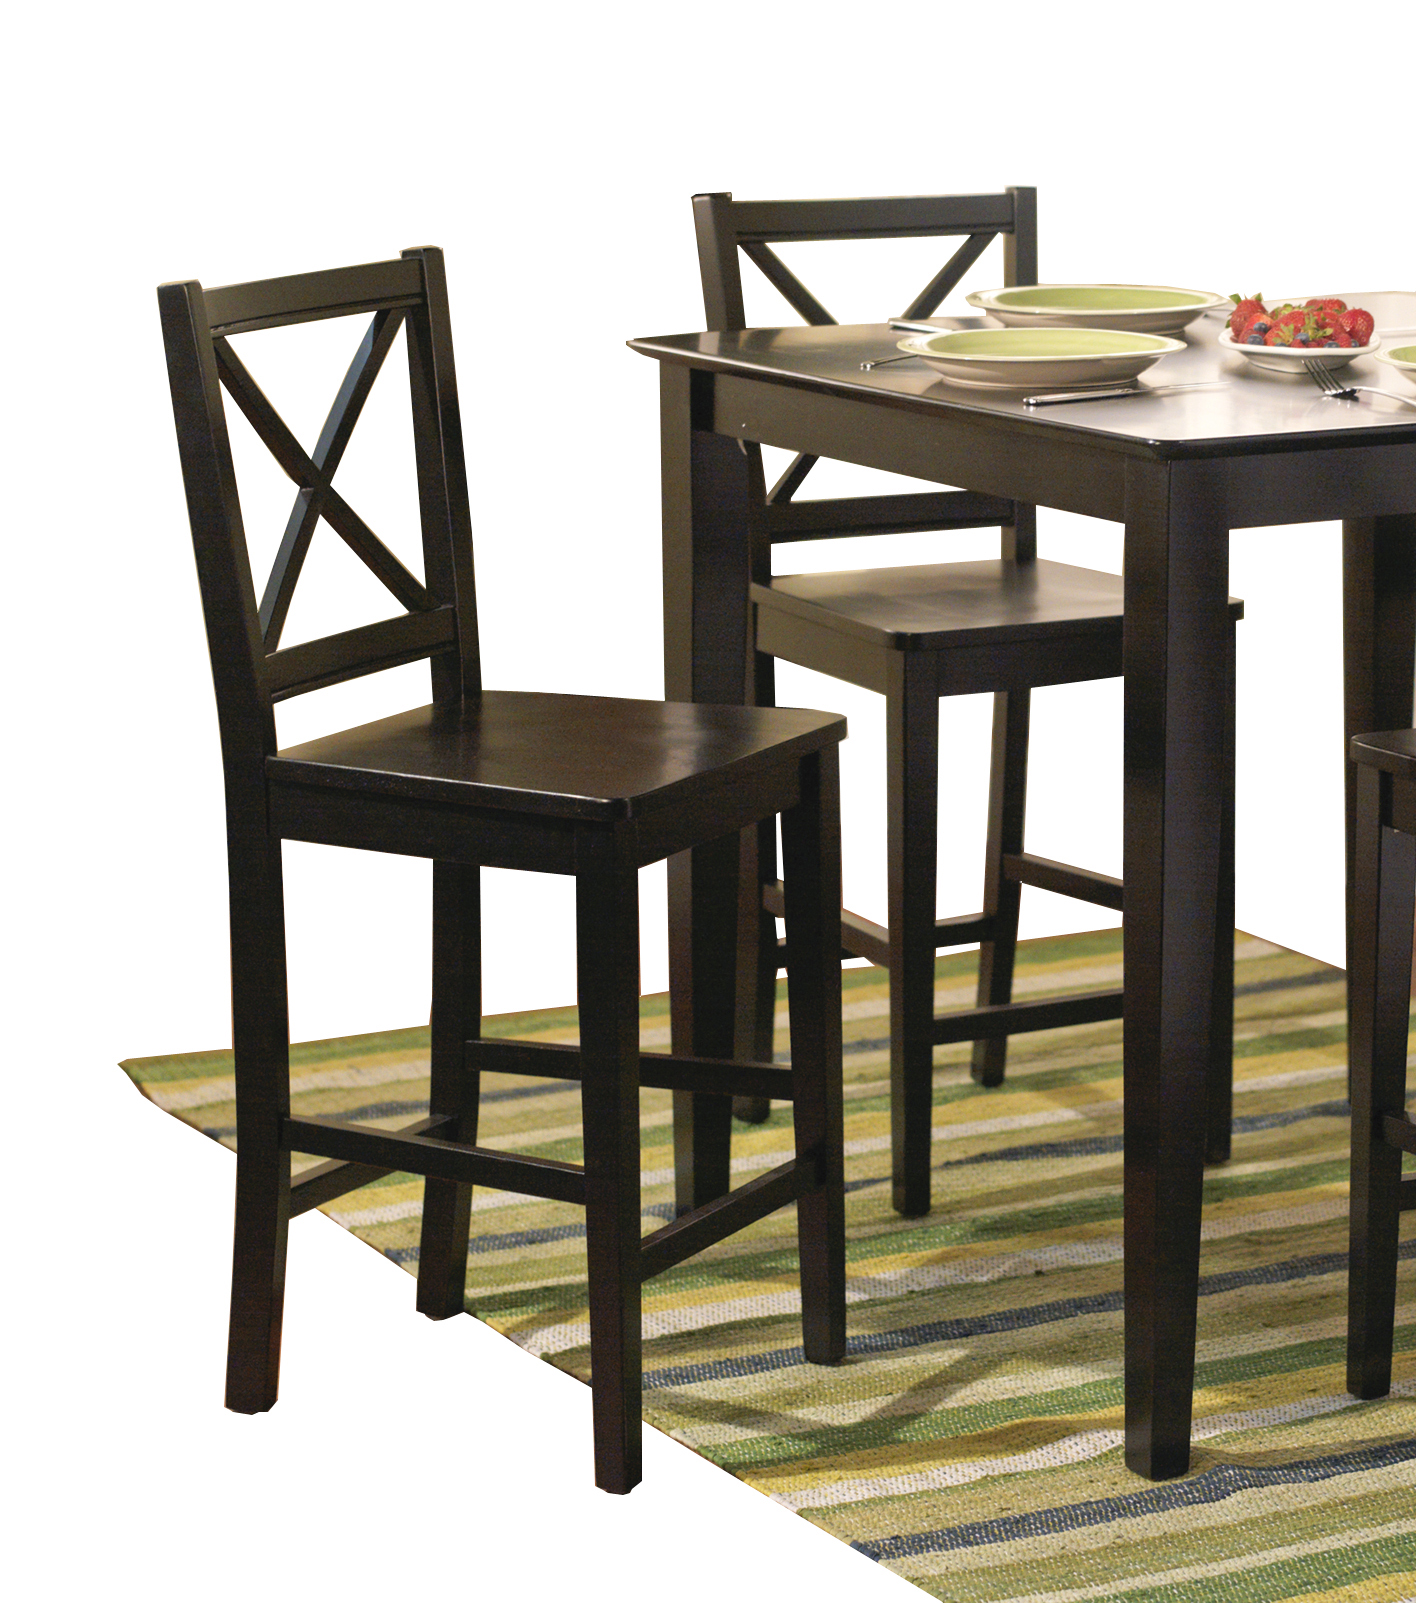 TMS Virginia Cross-Back 24" Counter Stools,Black, Set of 2 - image 5 of 6